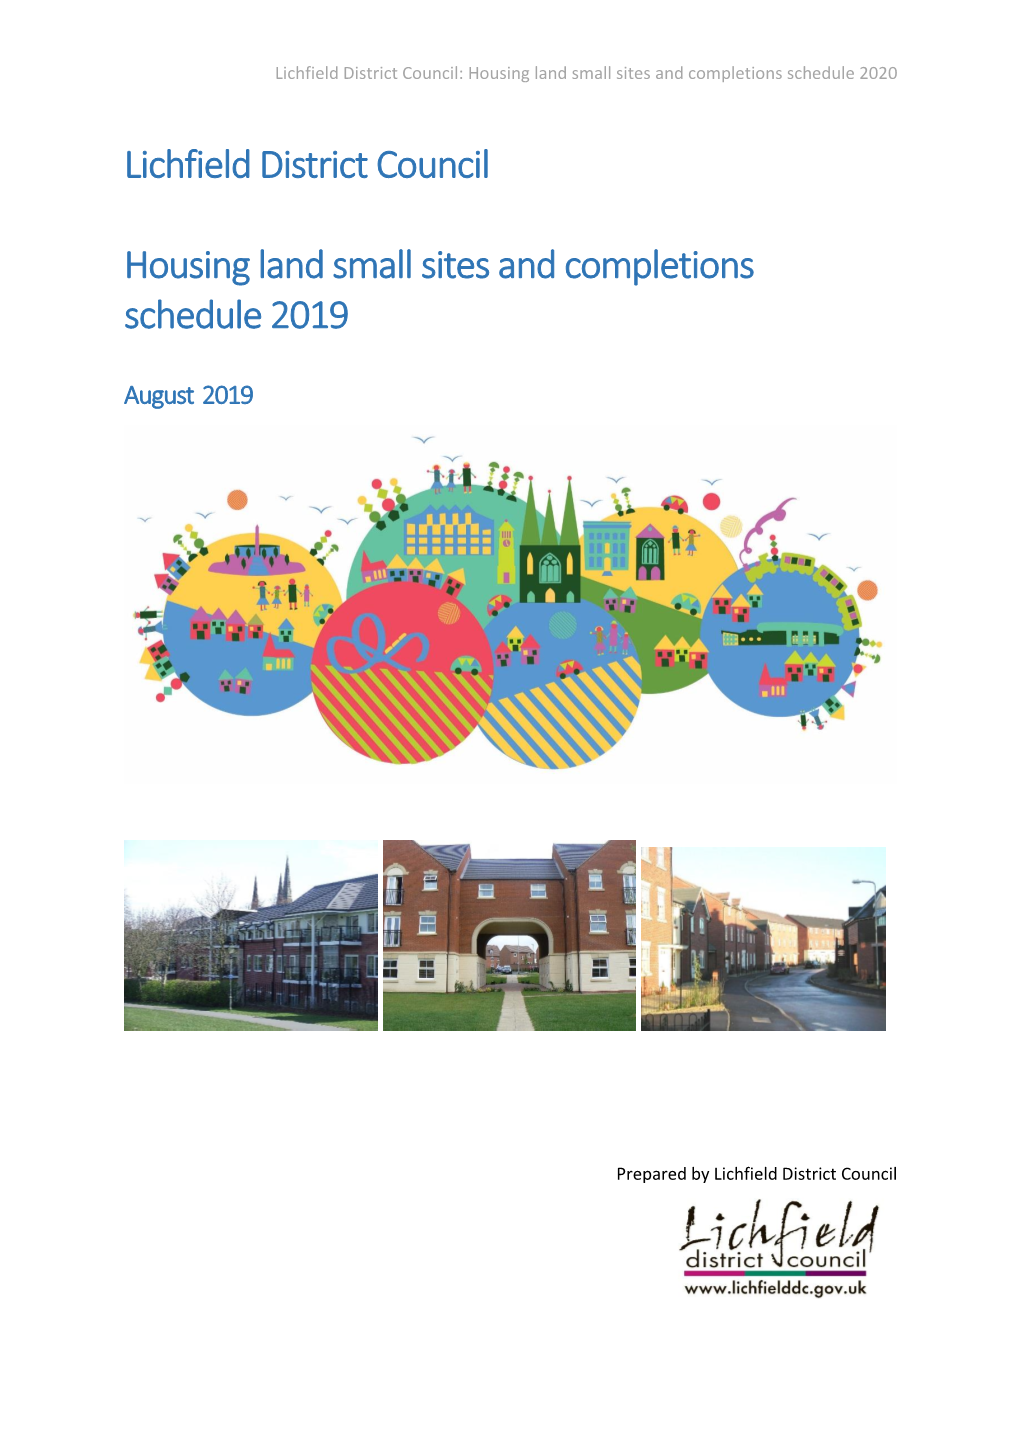 Lichfield District Council Housing Land Small Sites and Completions